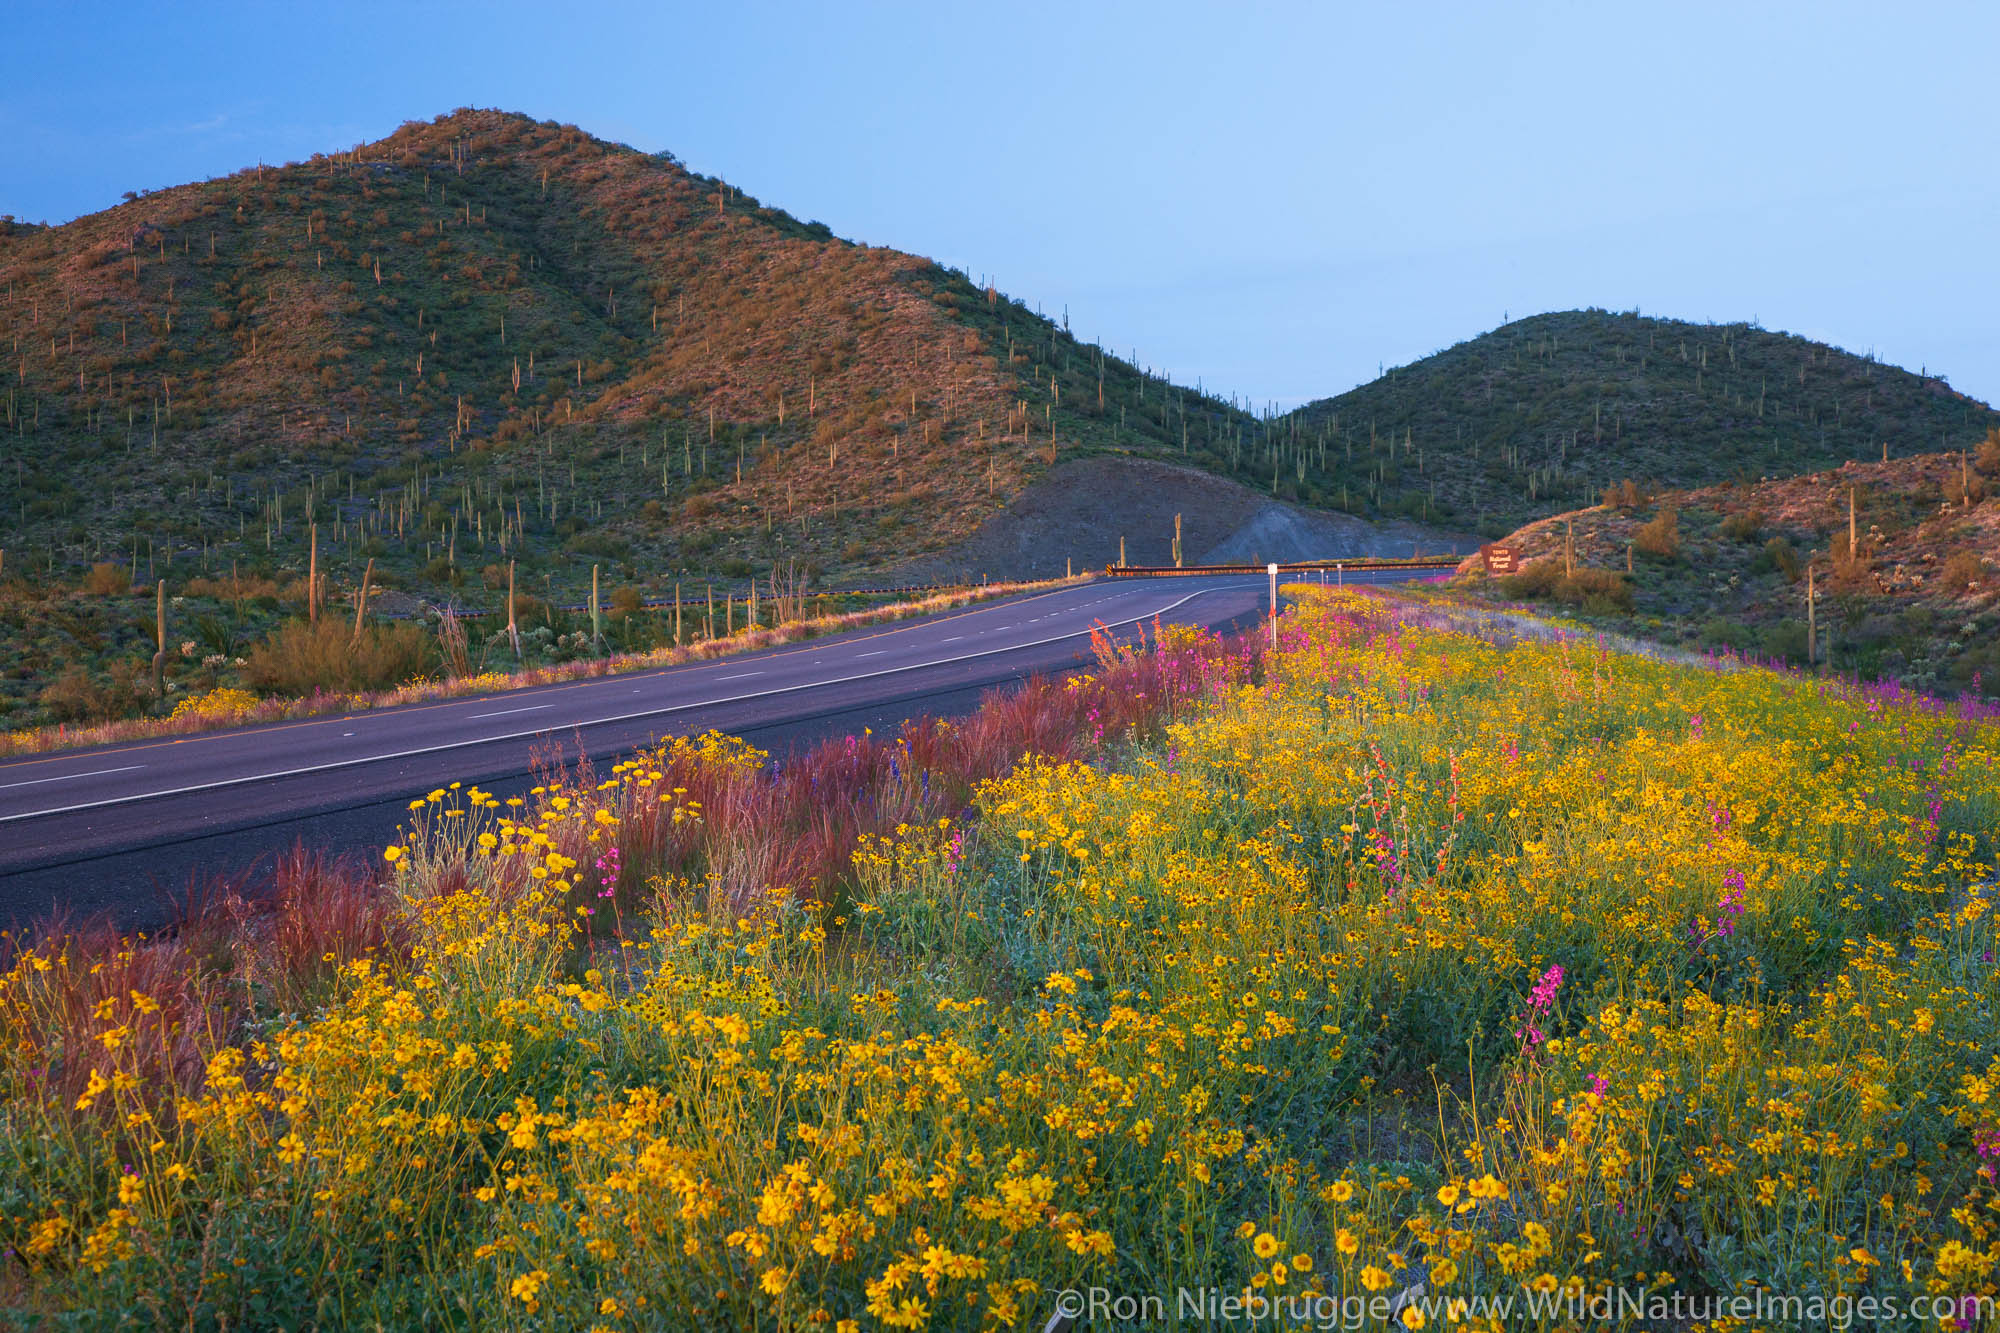 Spring wildflowers along Highway 60 (Superstition Highway), Tonto National Forest, East of Phoenix, Arizona.